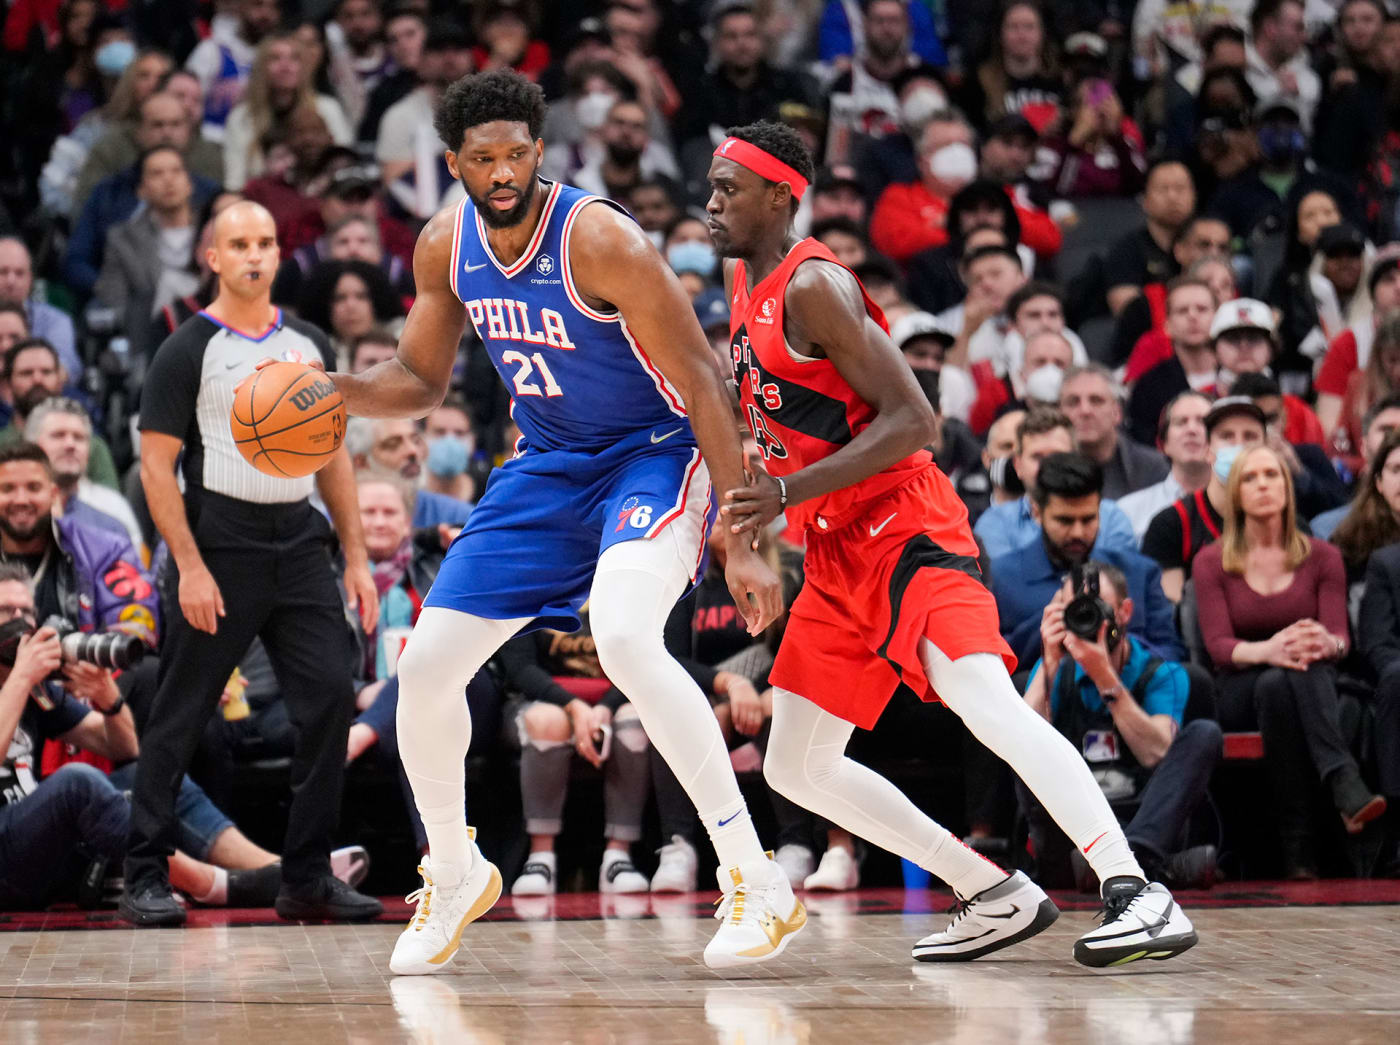 Joel Embiid #21 of the Philadelphia 76ers is guarded by Pascal Siakam #43 of the Toronto Raptors